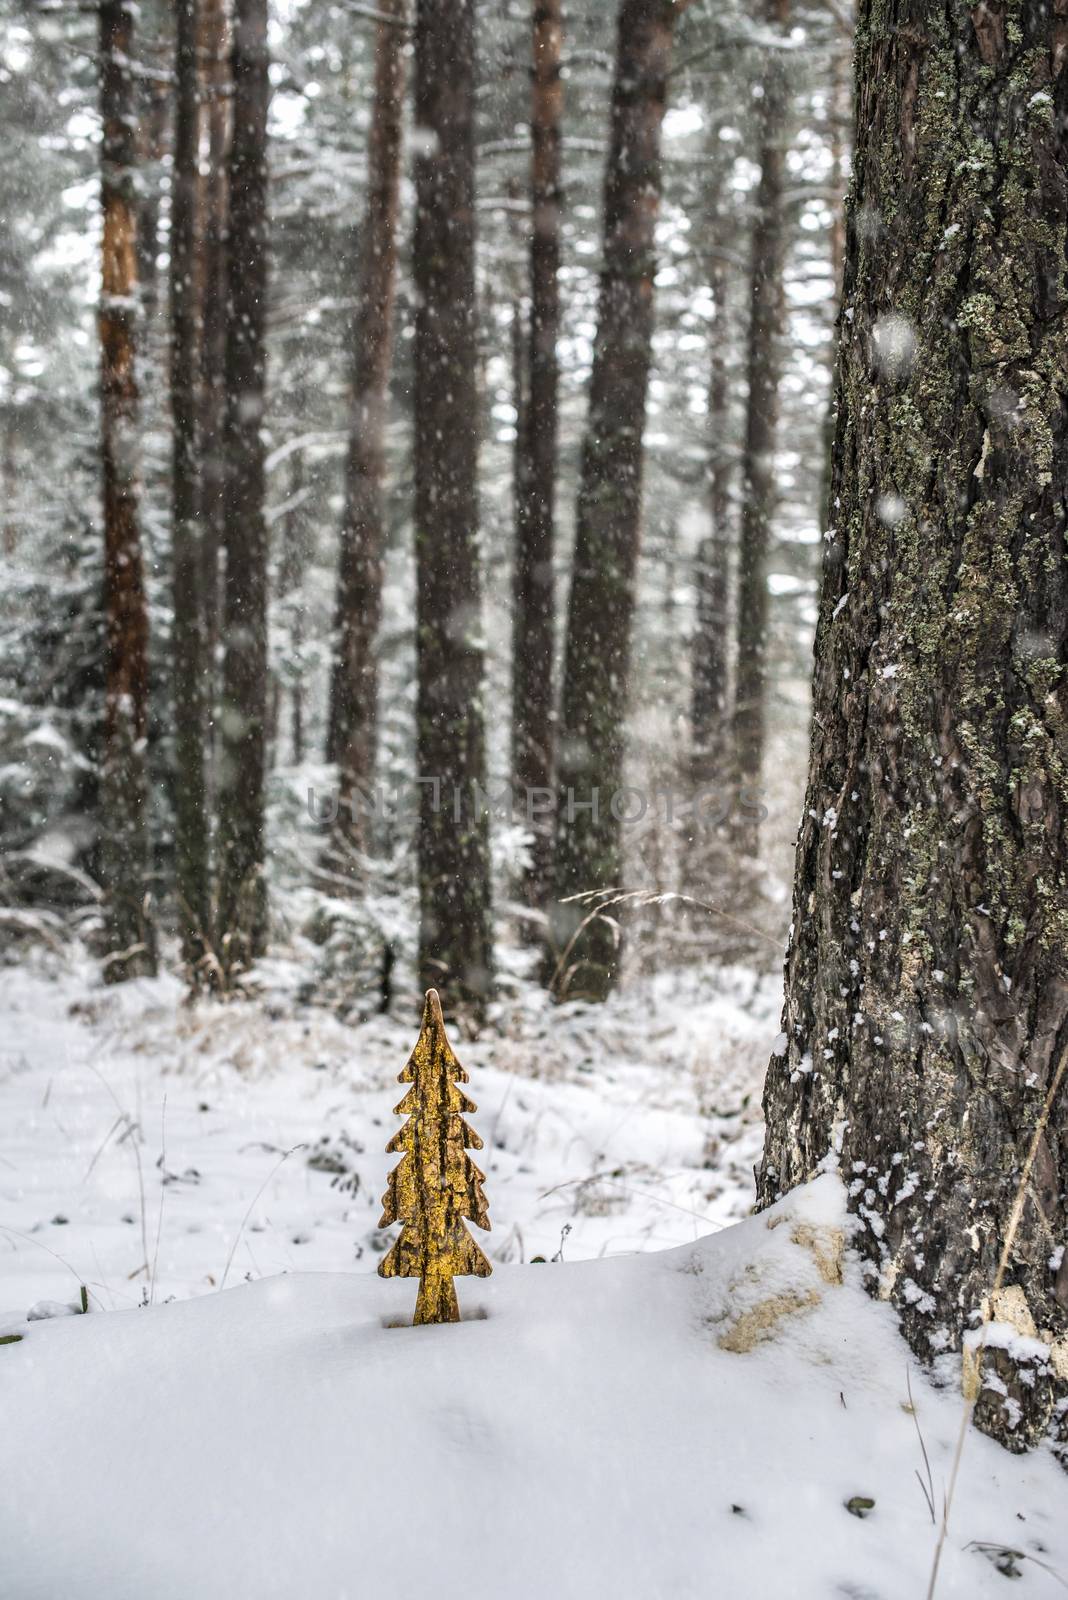 Wooden shaped pine tree in the snow in forest. Fir tree shape and shiny paint. Snowing in the forest. Gold colors